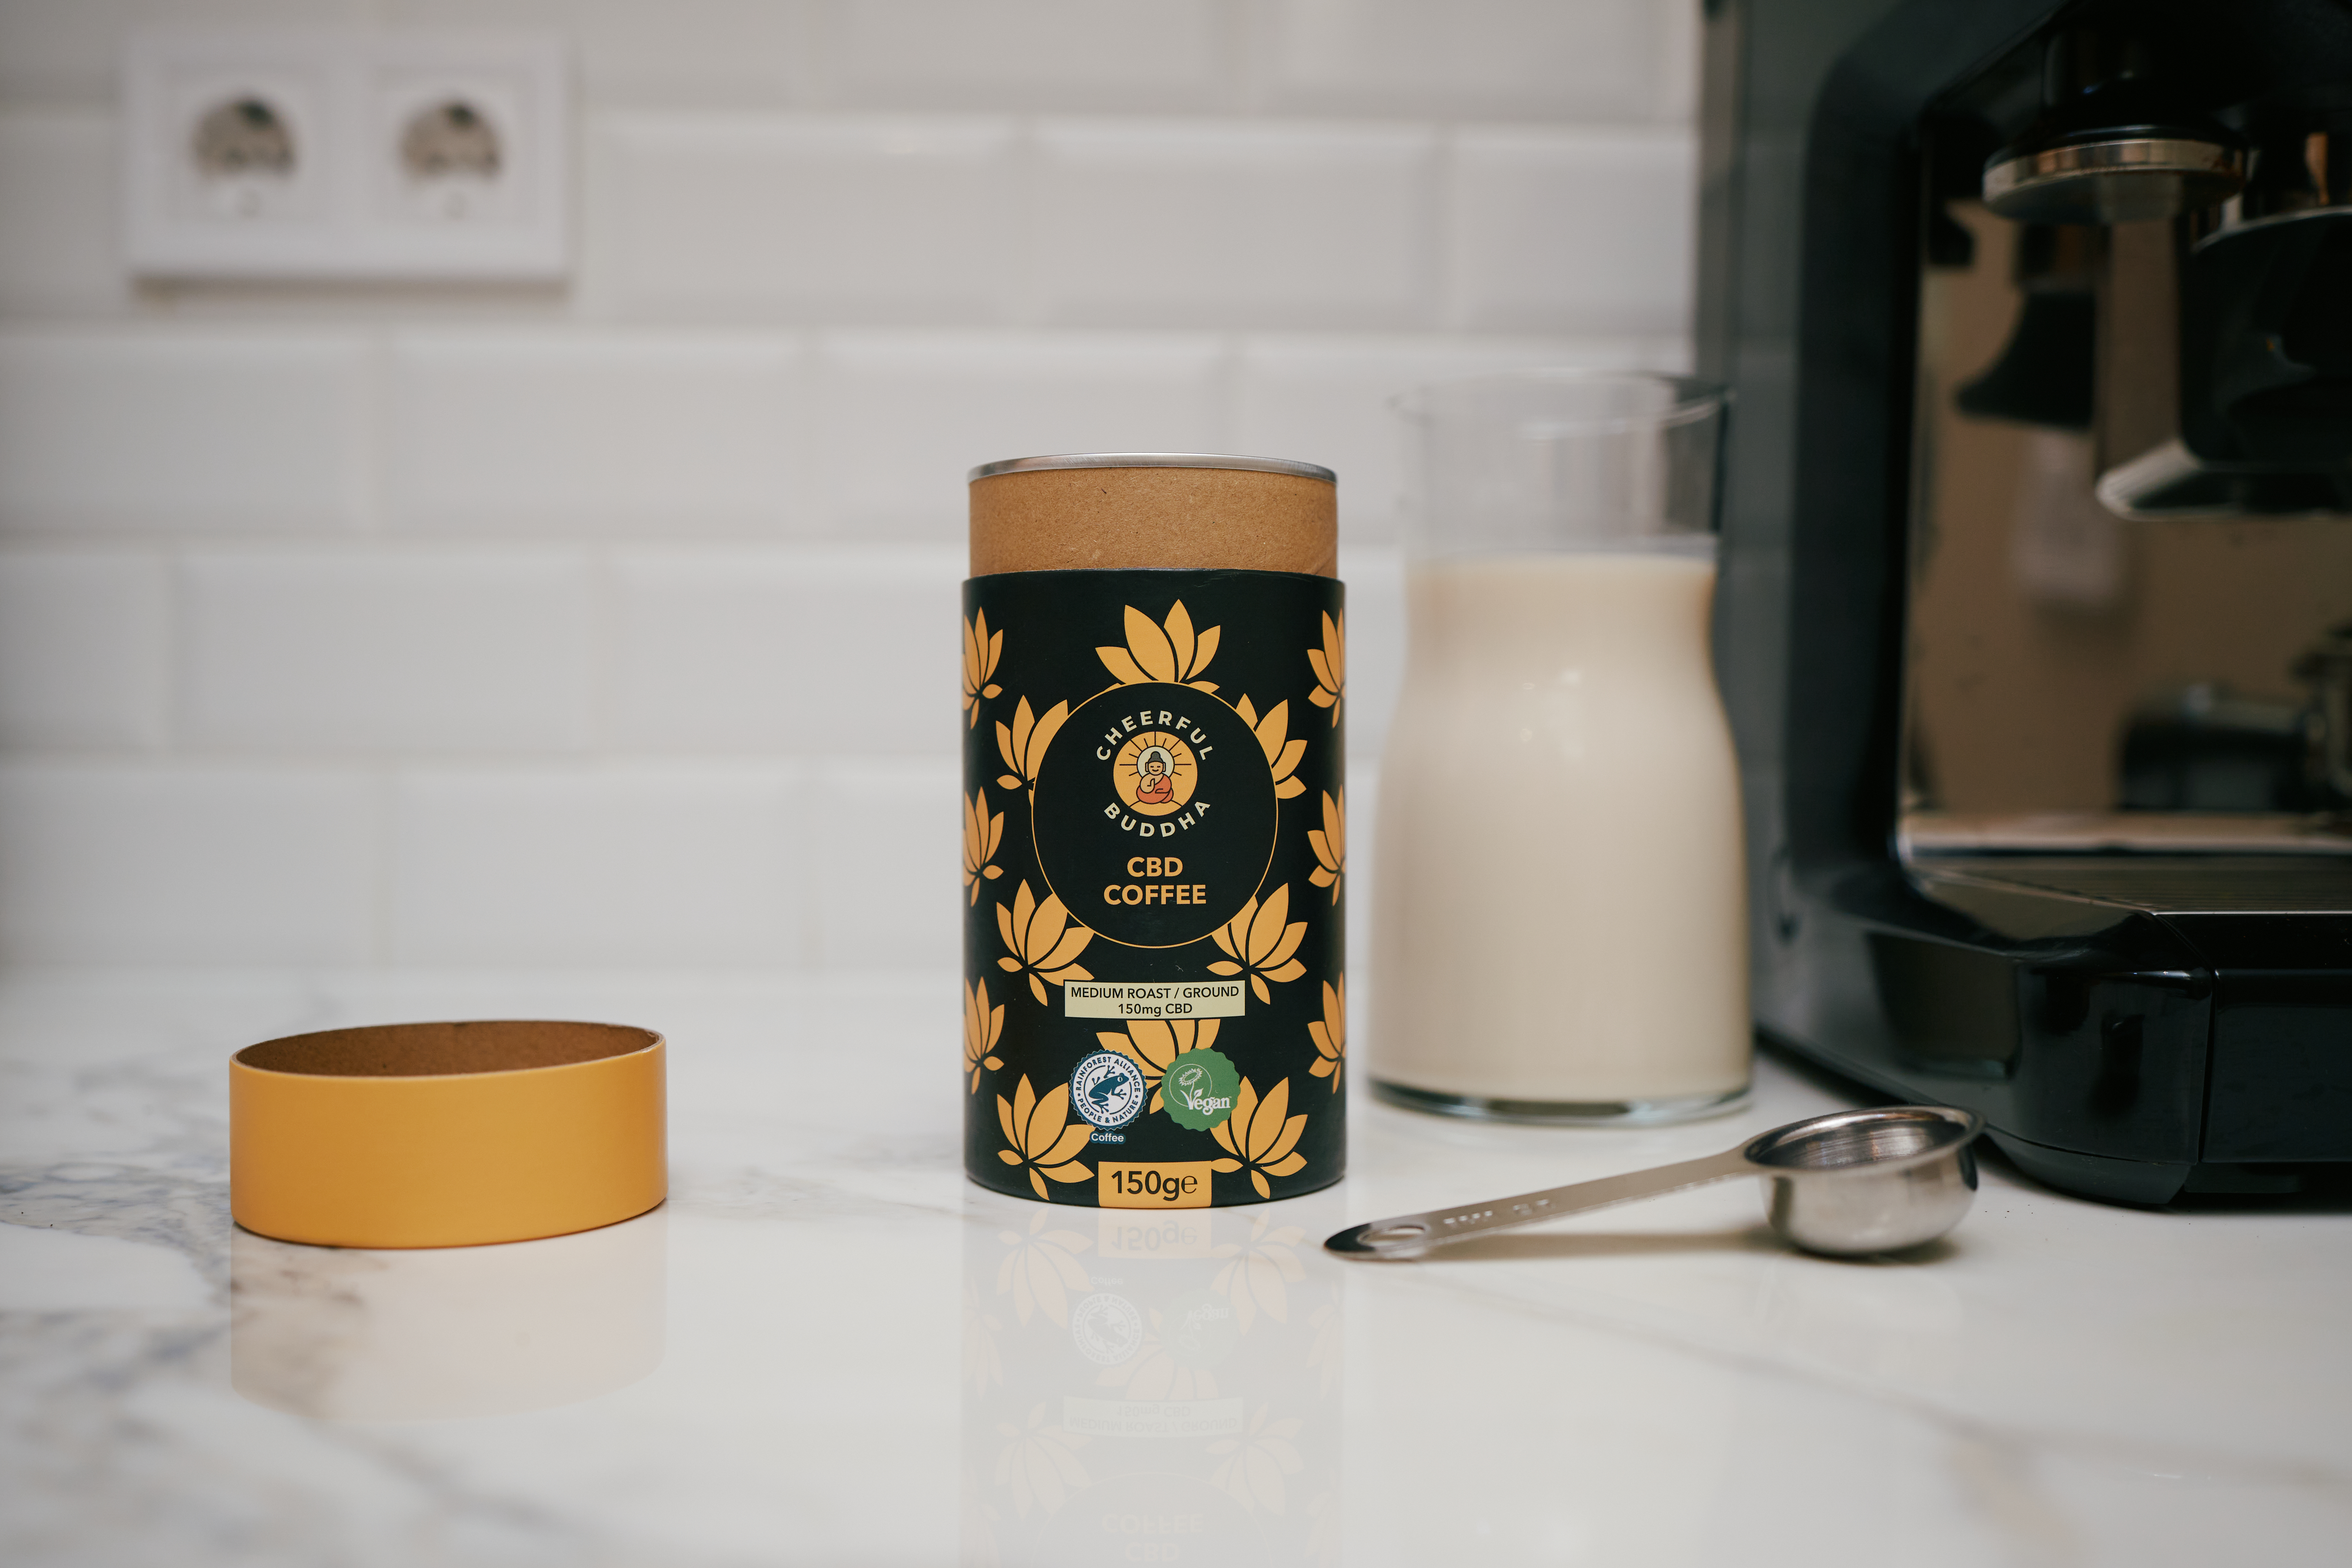 CBD boosted coffee on a kitchen cabinet